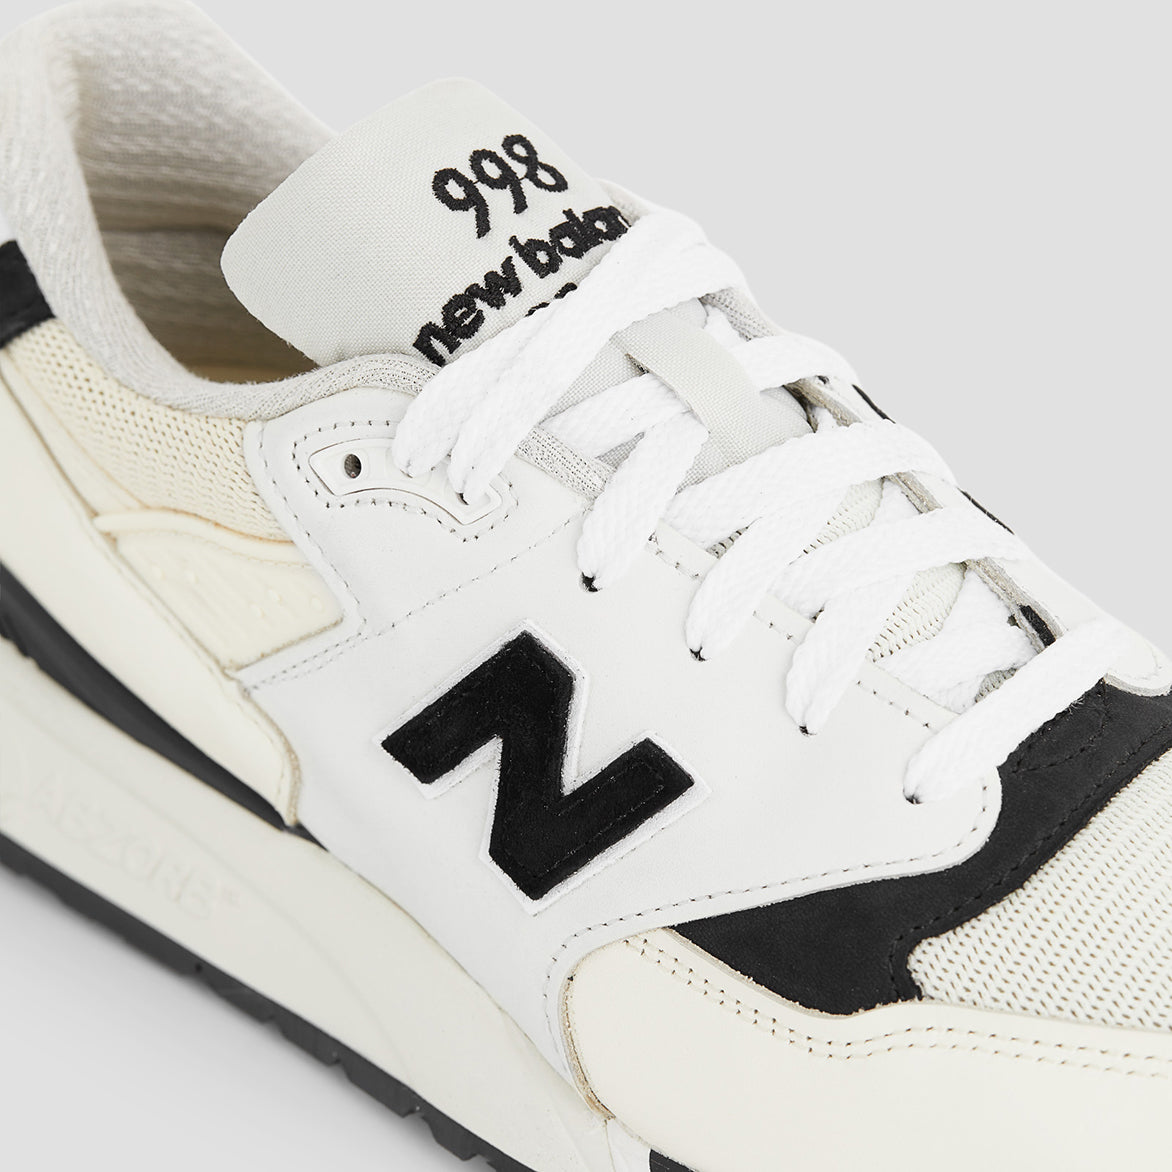 MADE IN USA 998 "WHITE / BLACK"